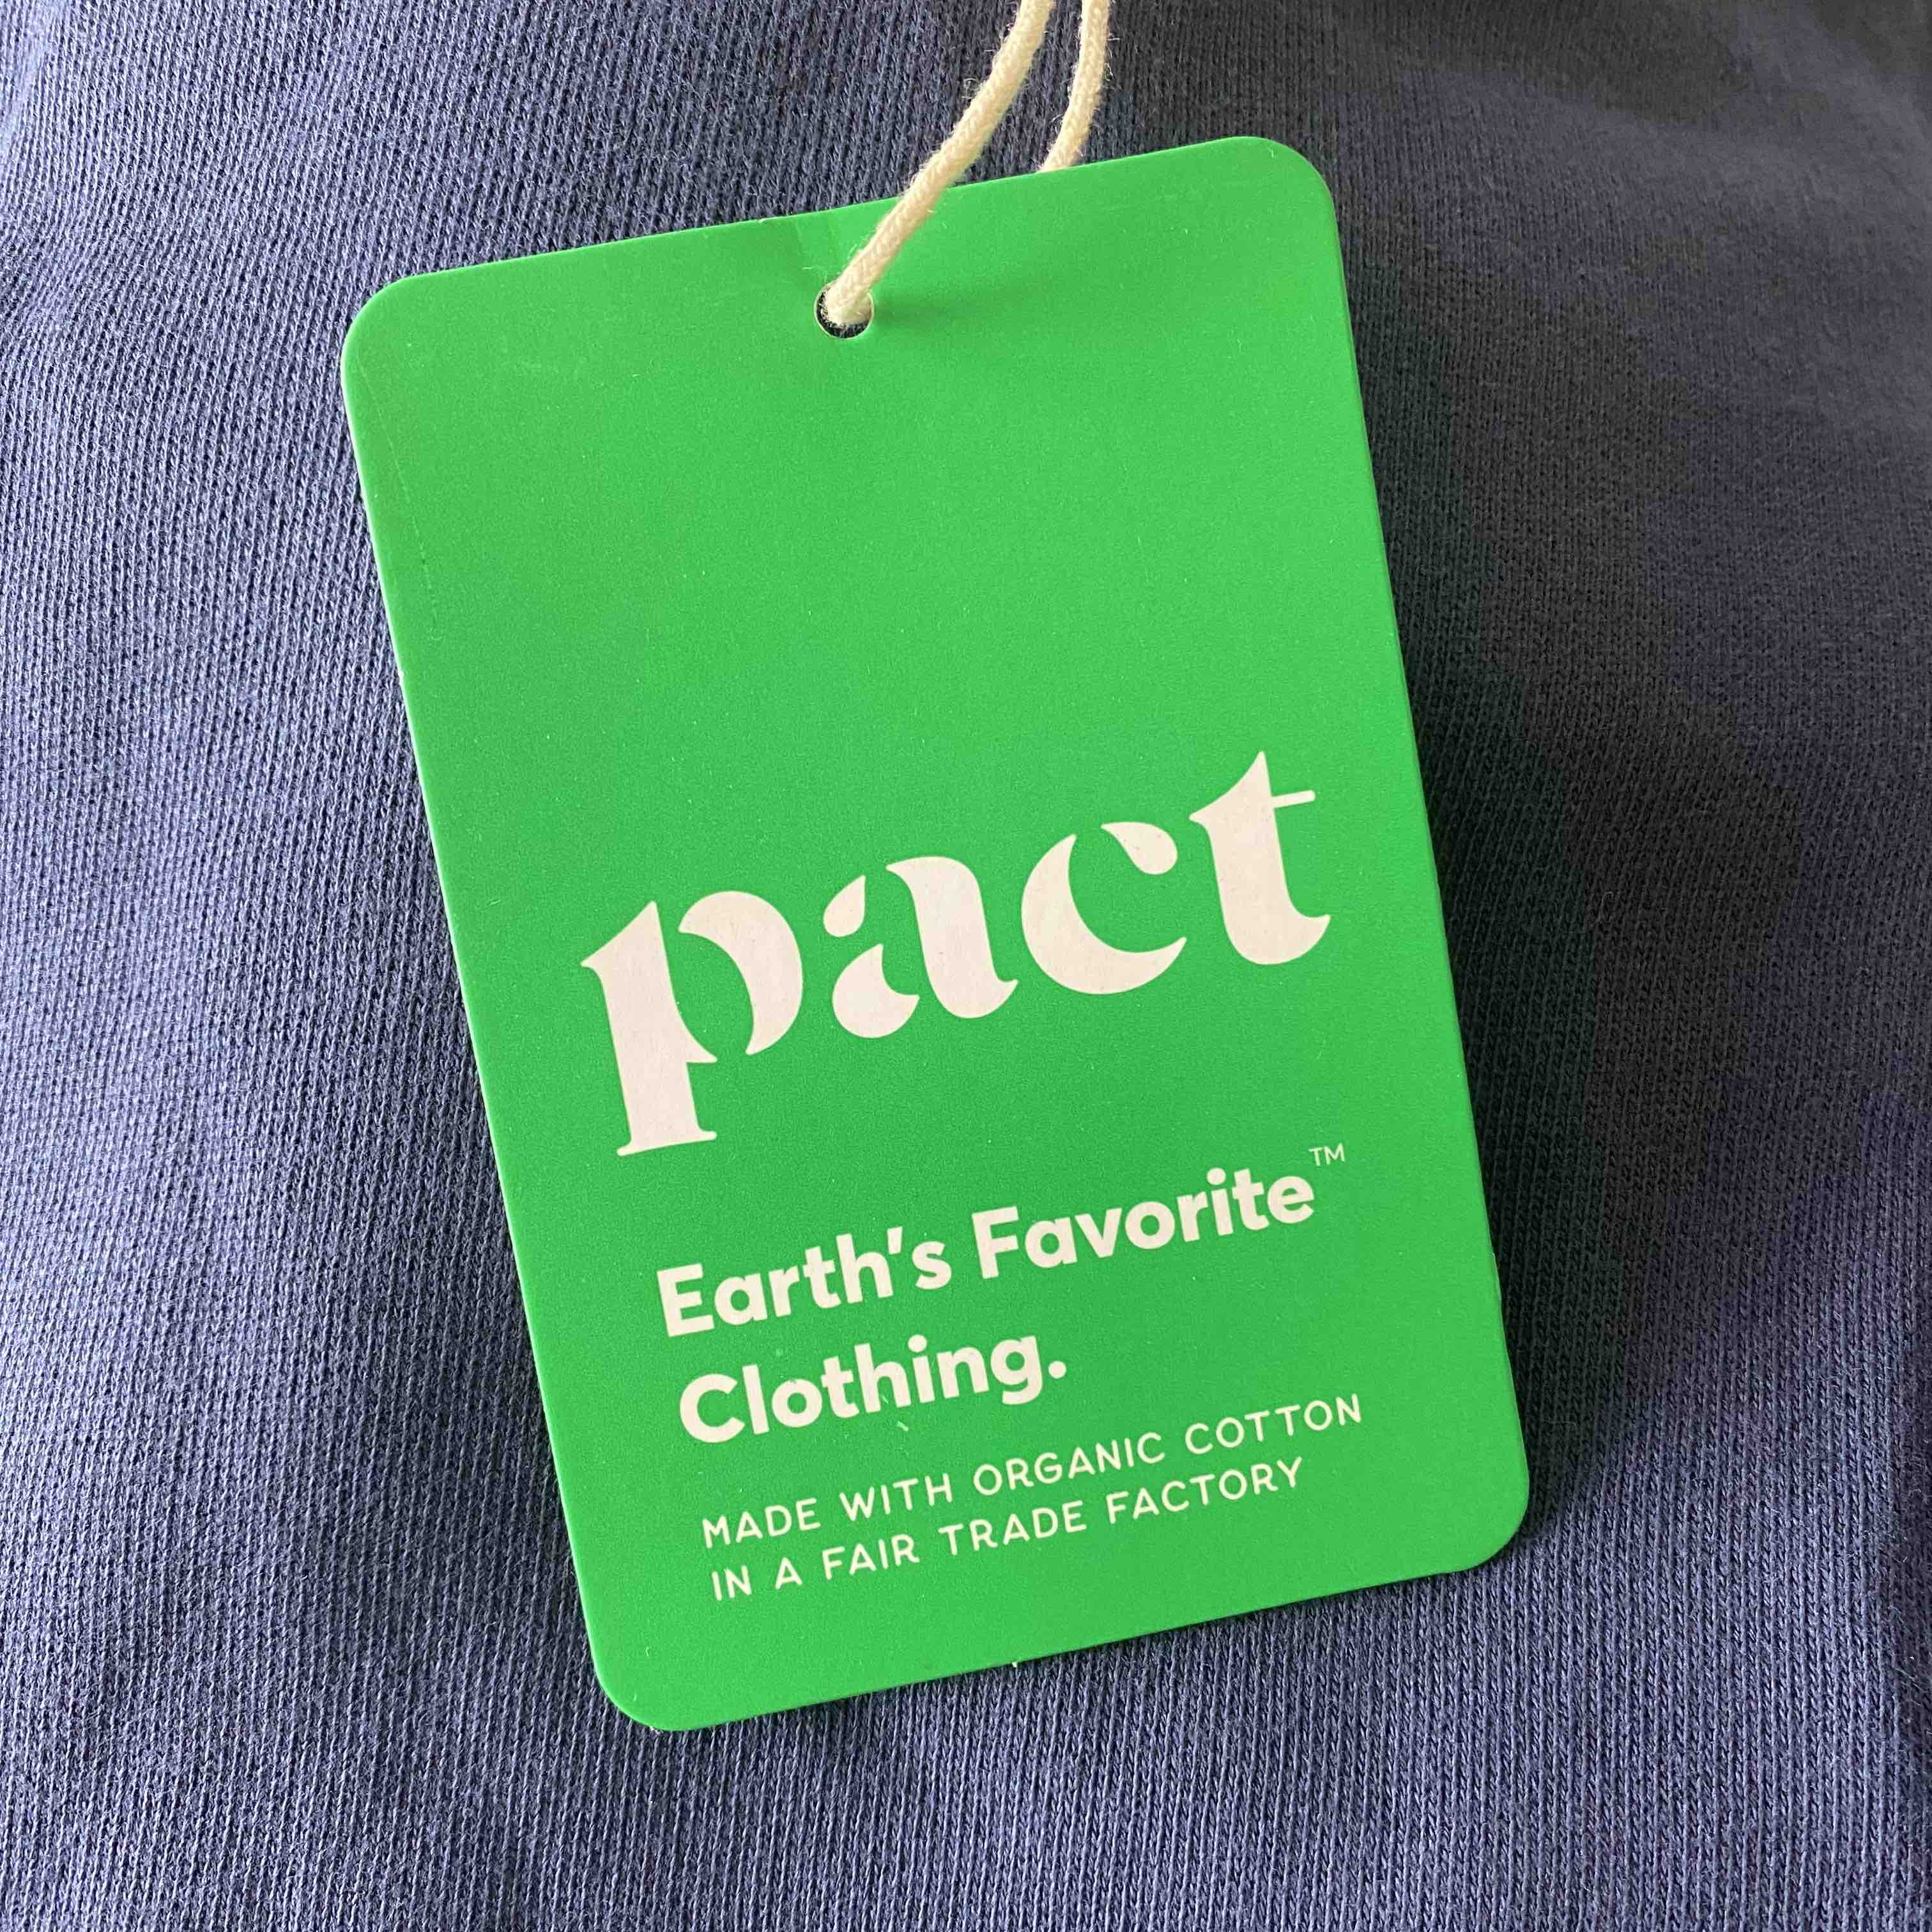 PACT - Sustainable Clothing Facts, Rating, Goals